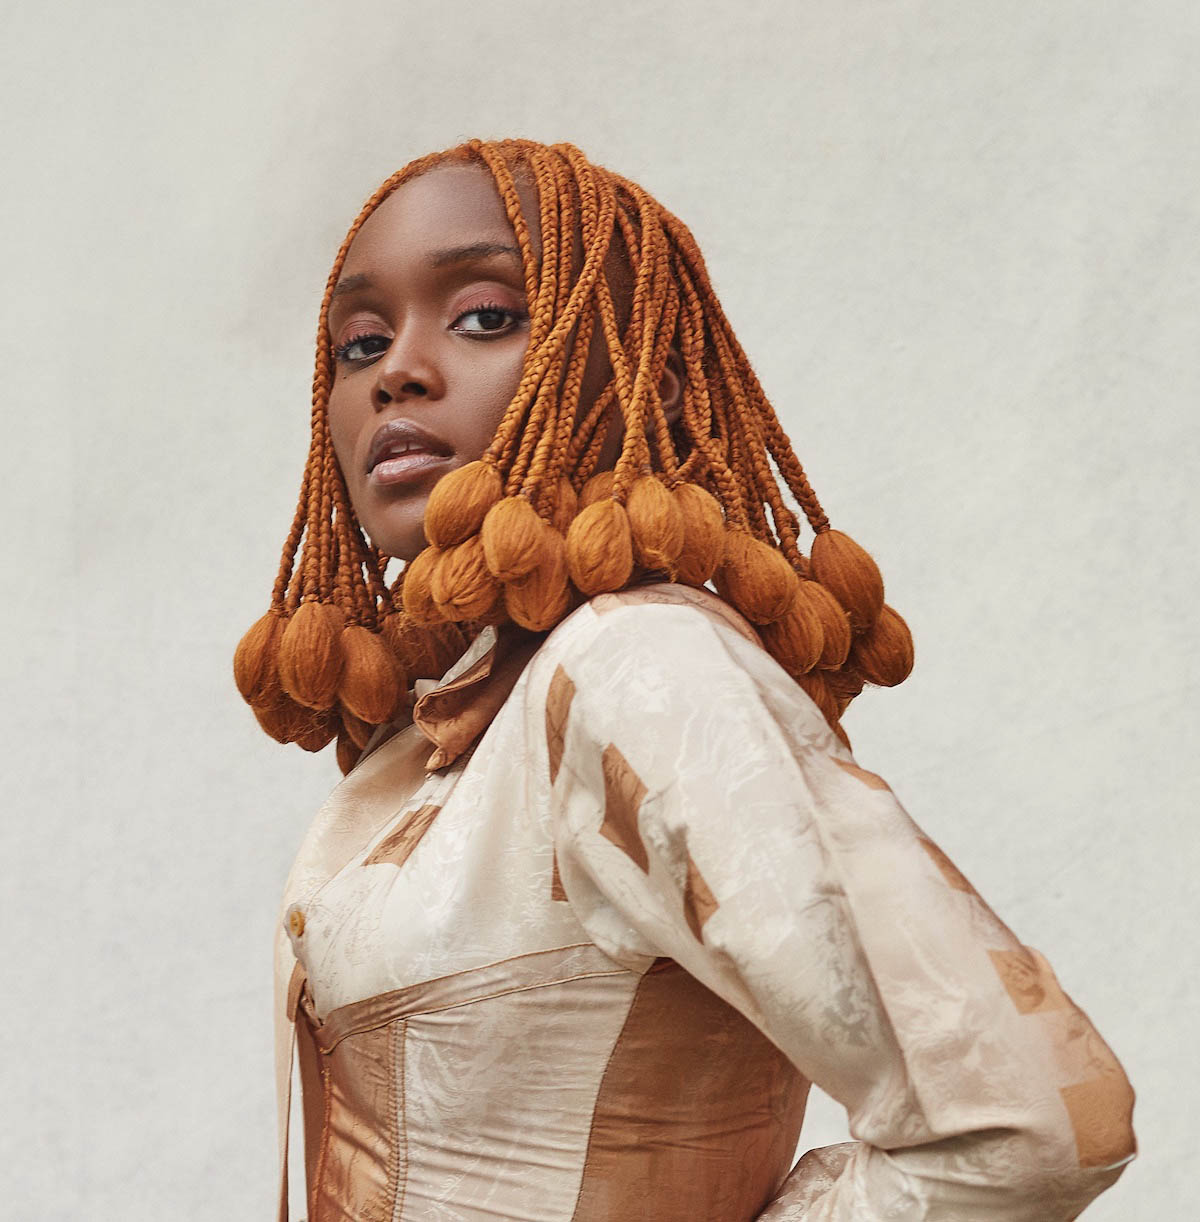 Falana can be seen up to her waist and from the side. However, she turns her face towards the camera. Her hair is orange and braided into many small braids, at the ends of which the hair is formed into a kind of small balloon. She is wearing a cream and brown silk top.